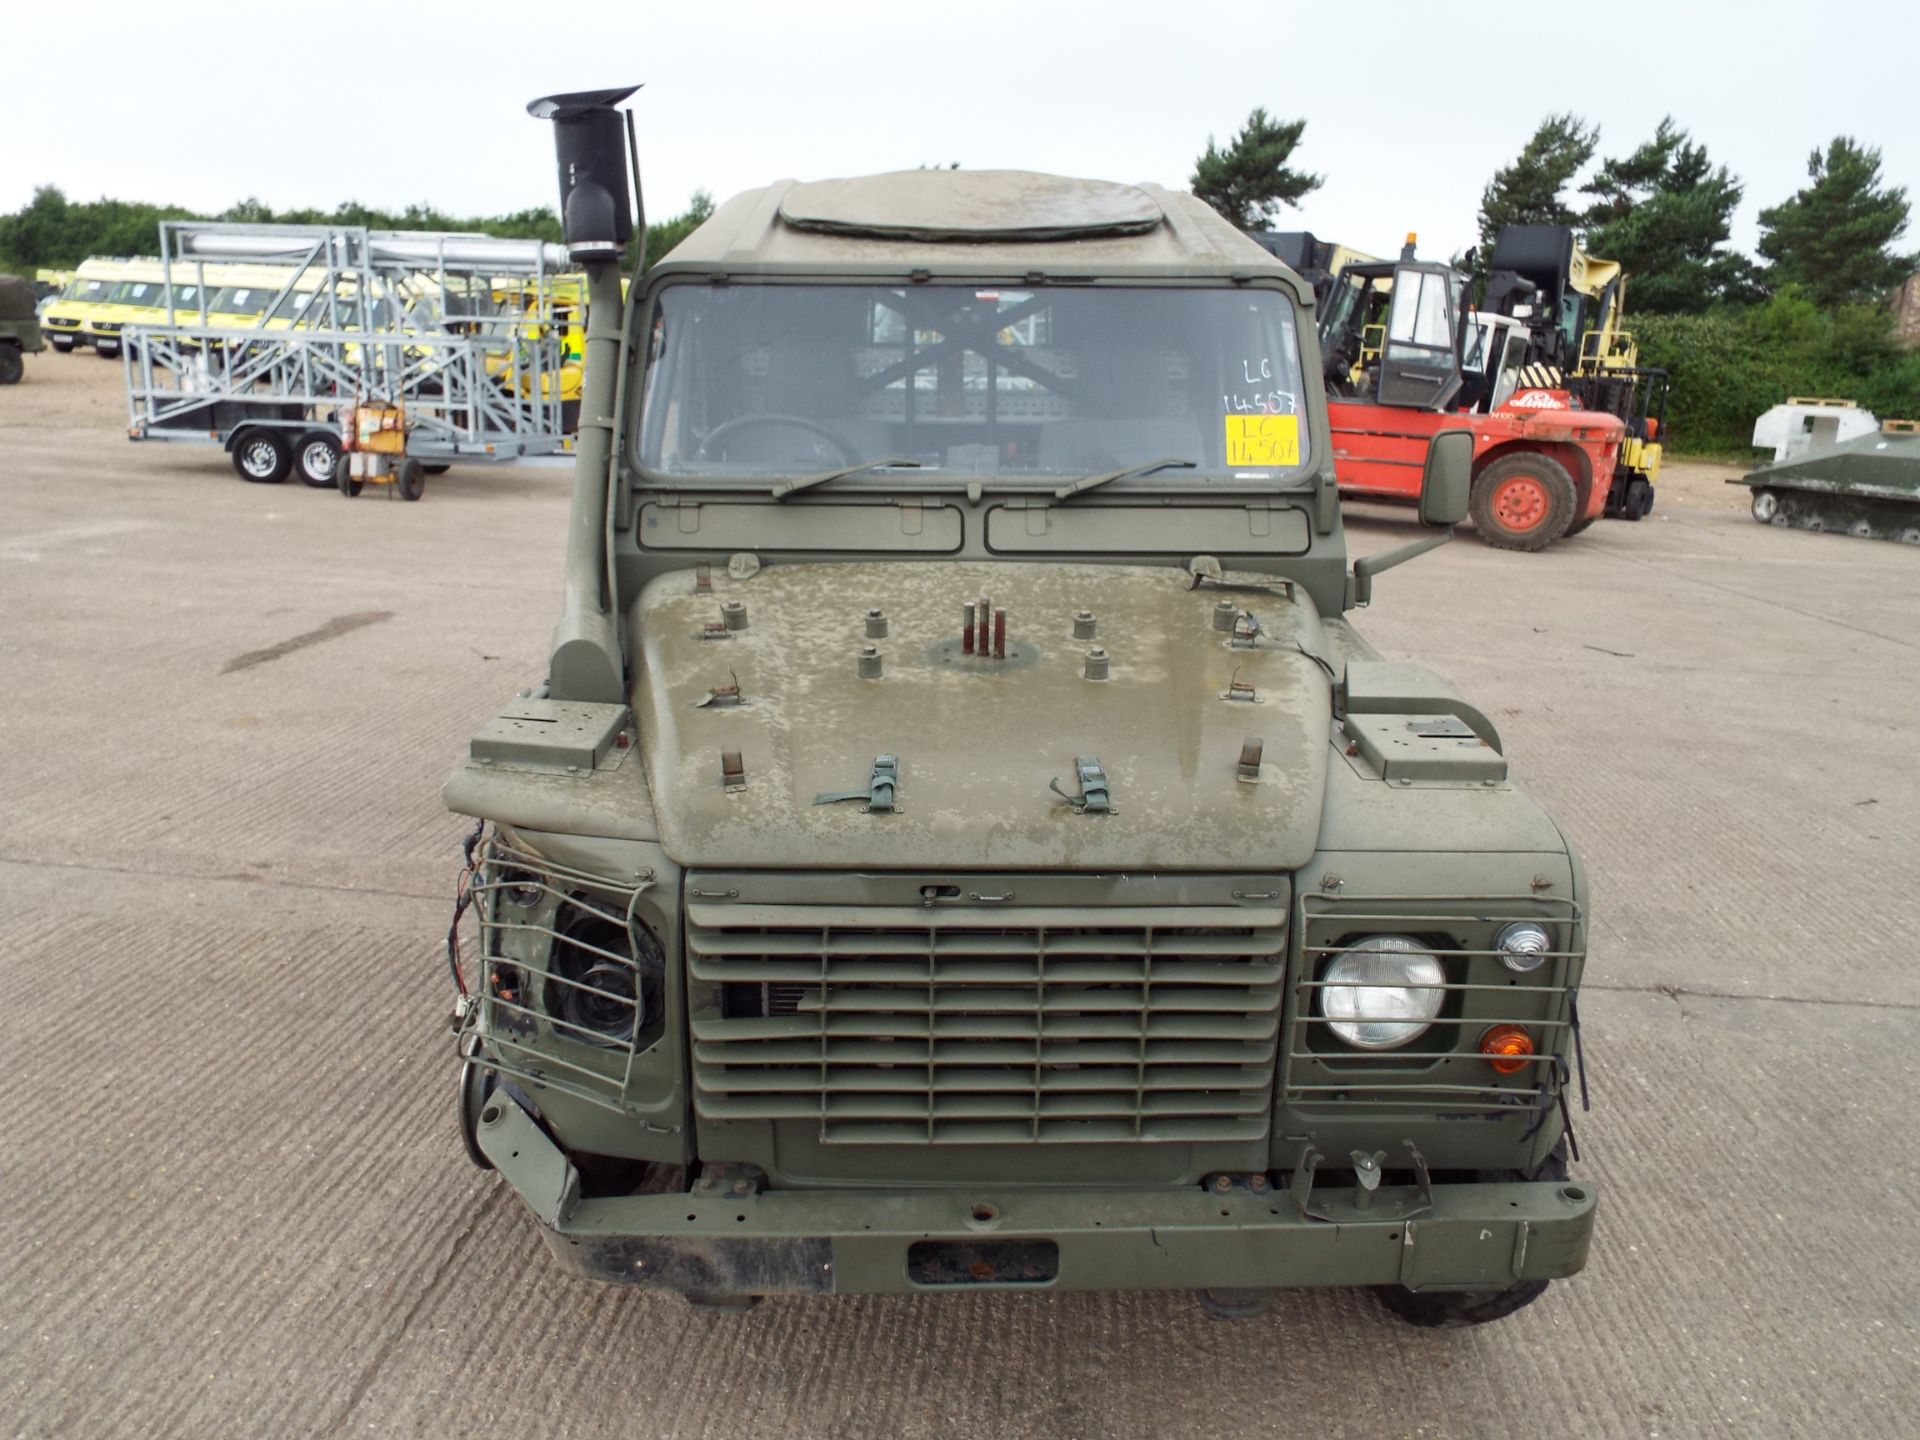 Royal Marines a Very Rare Winter/Water Land Rover Wolf 110 Hard Top - Image 8 of 27